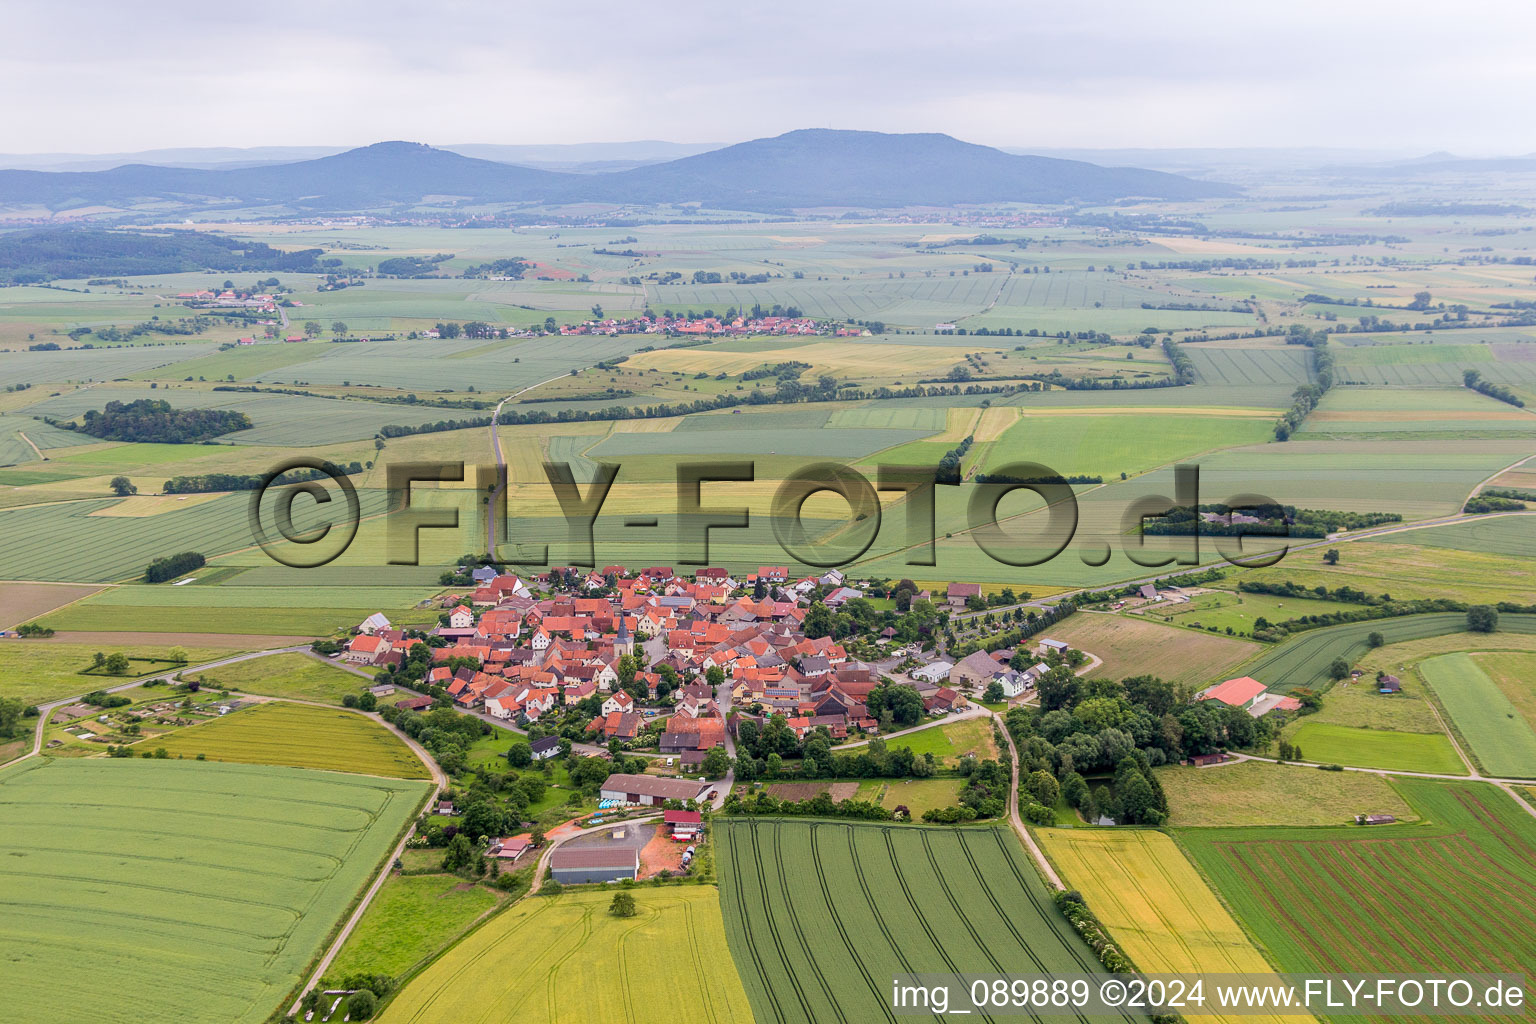 Aerial view of Village - view on the edge of agricultural fields and farmland in the district Rothausen in Hoechheim in the state Bavaria, Germany